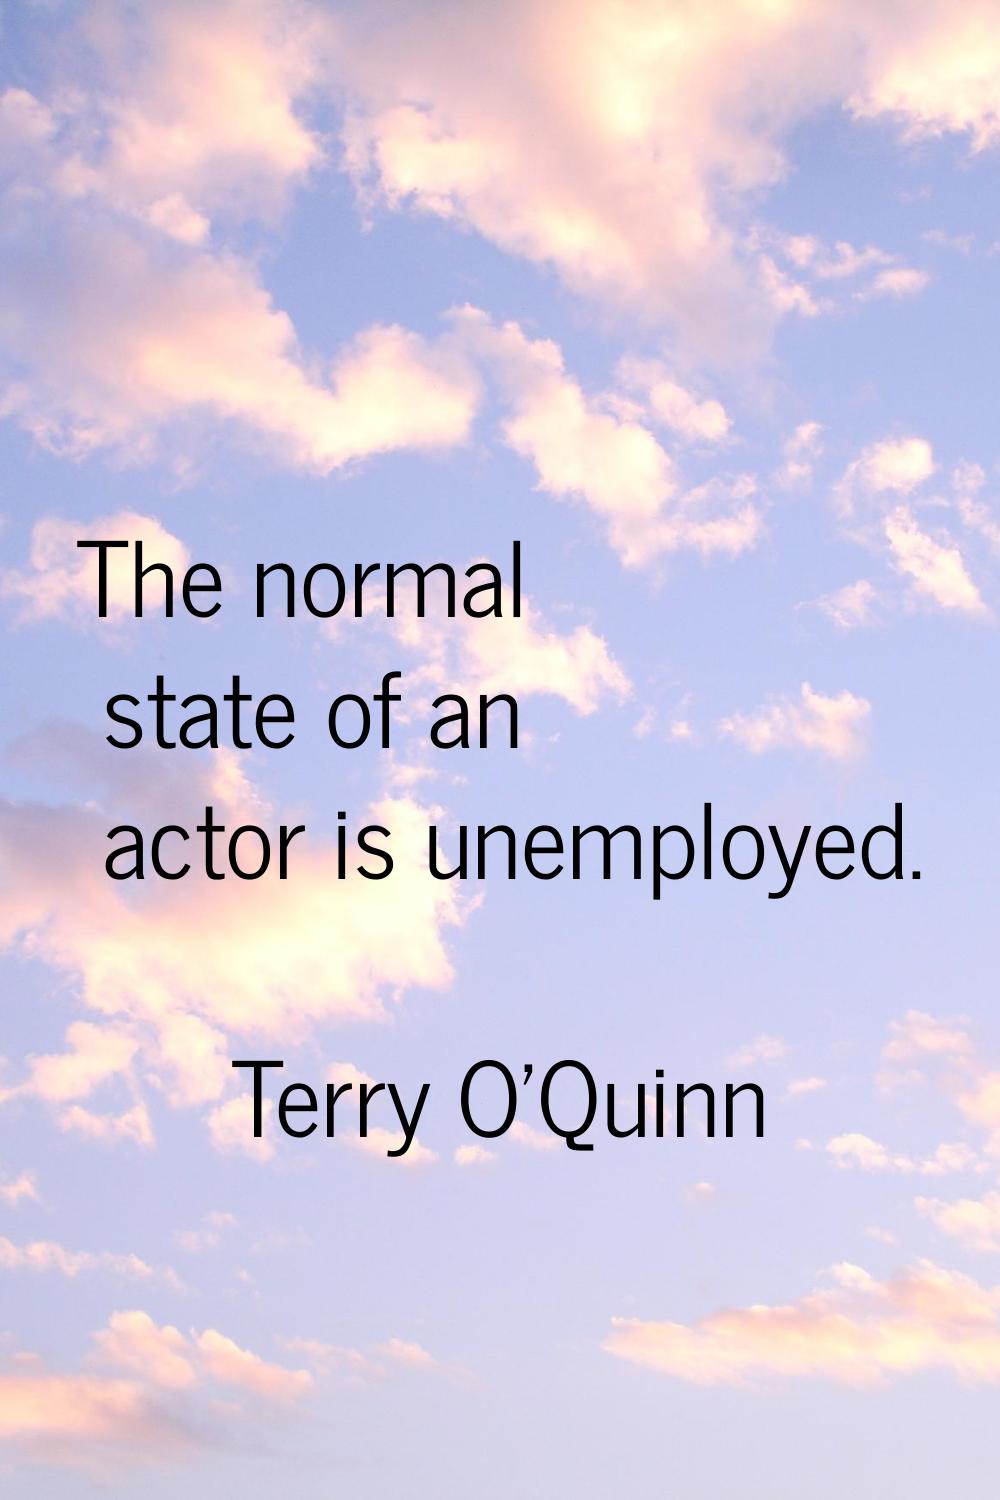 The normal state of an actor is unemployed.